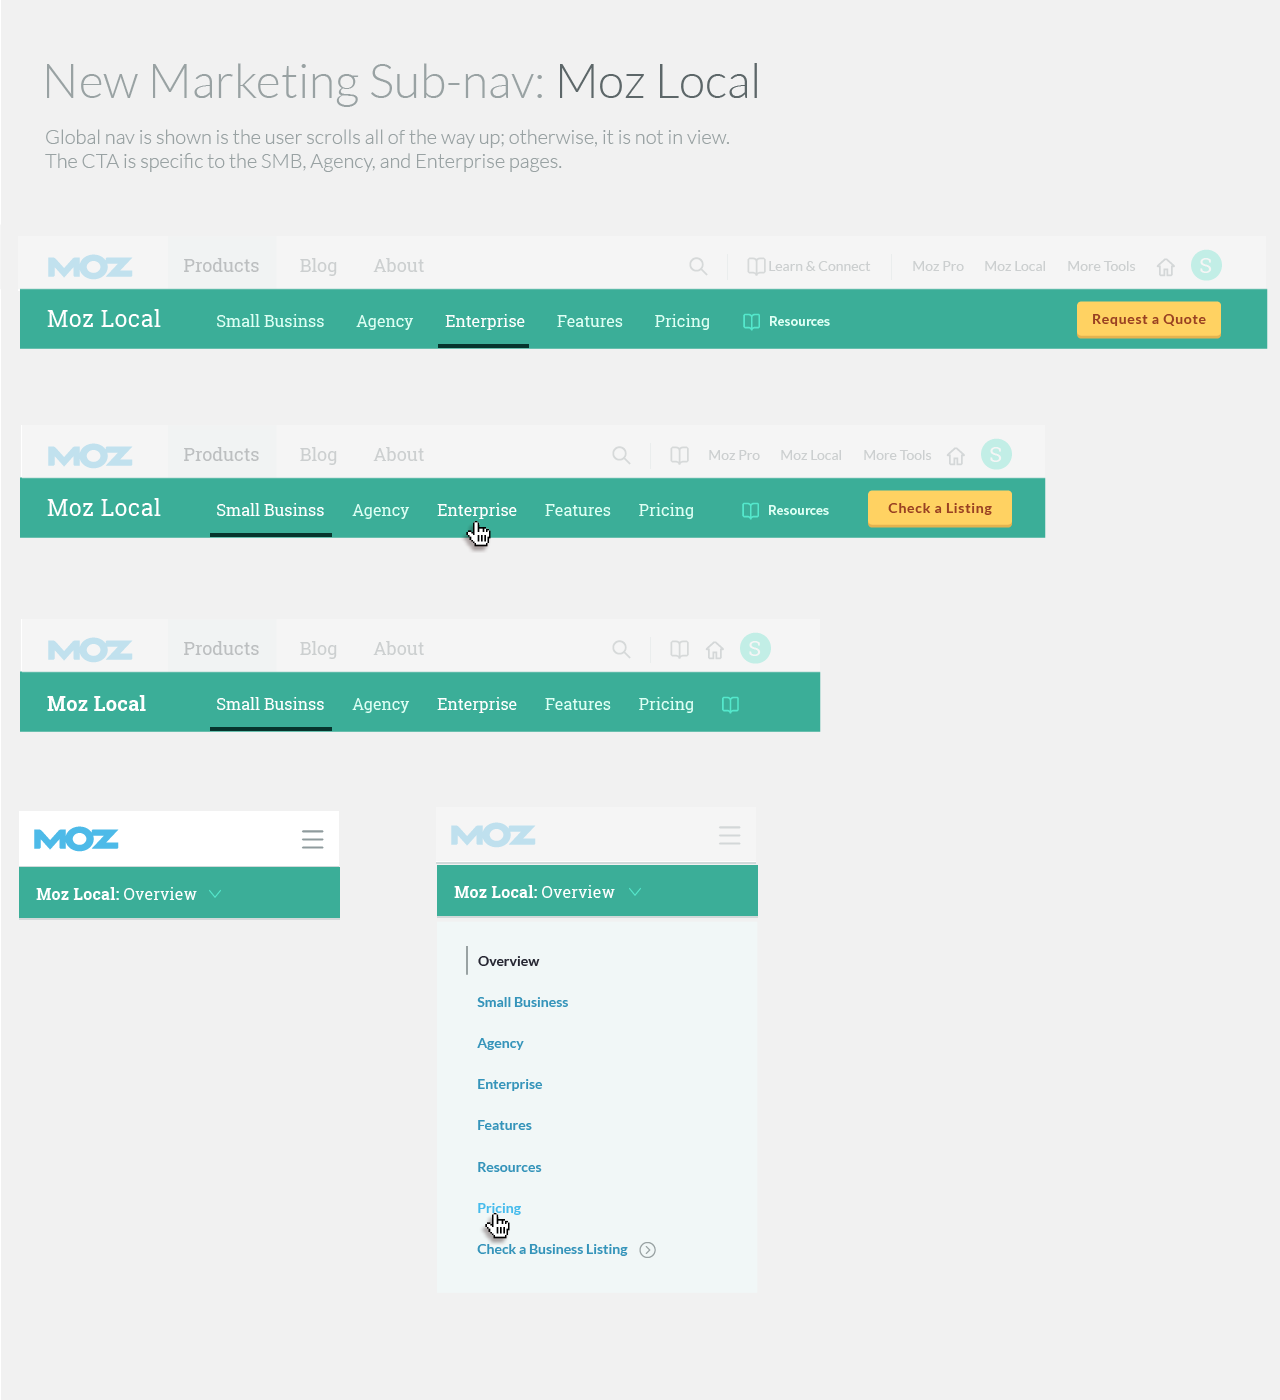 MozLocal_Navigation_States_Marketing-New.png